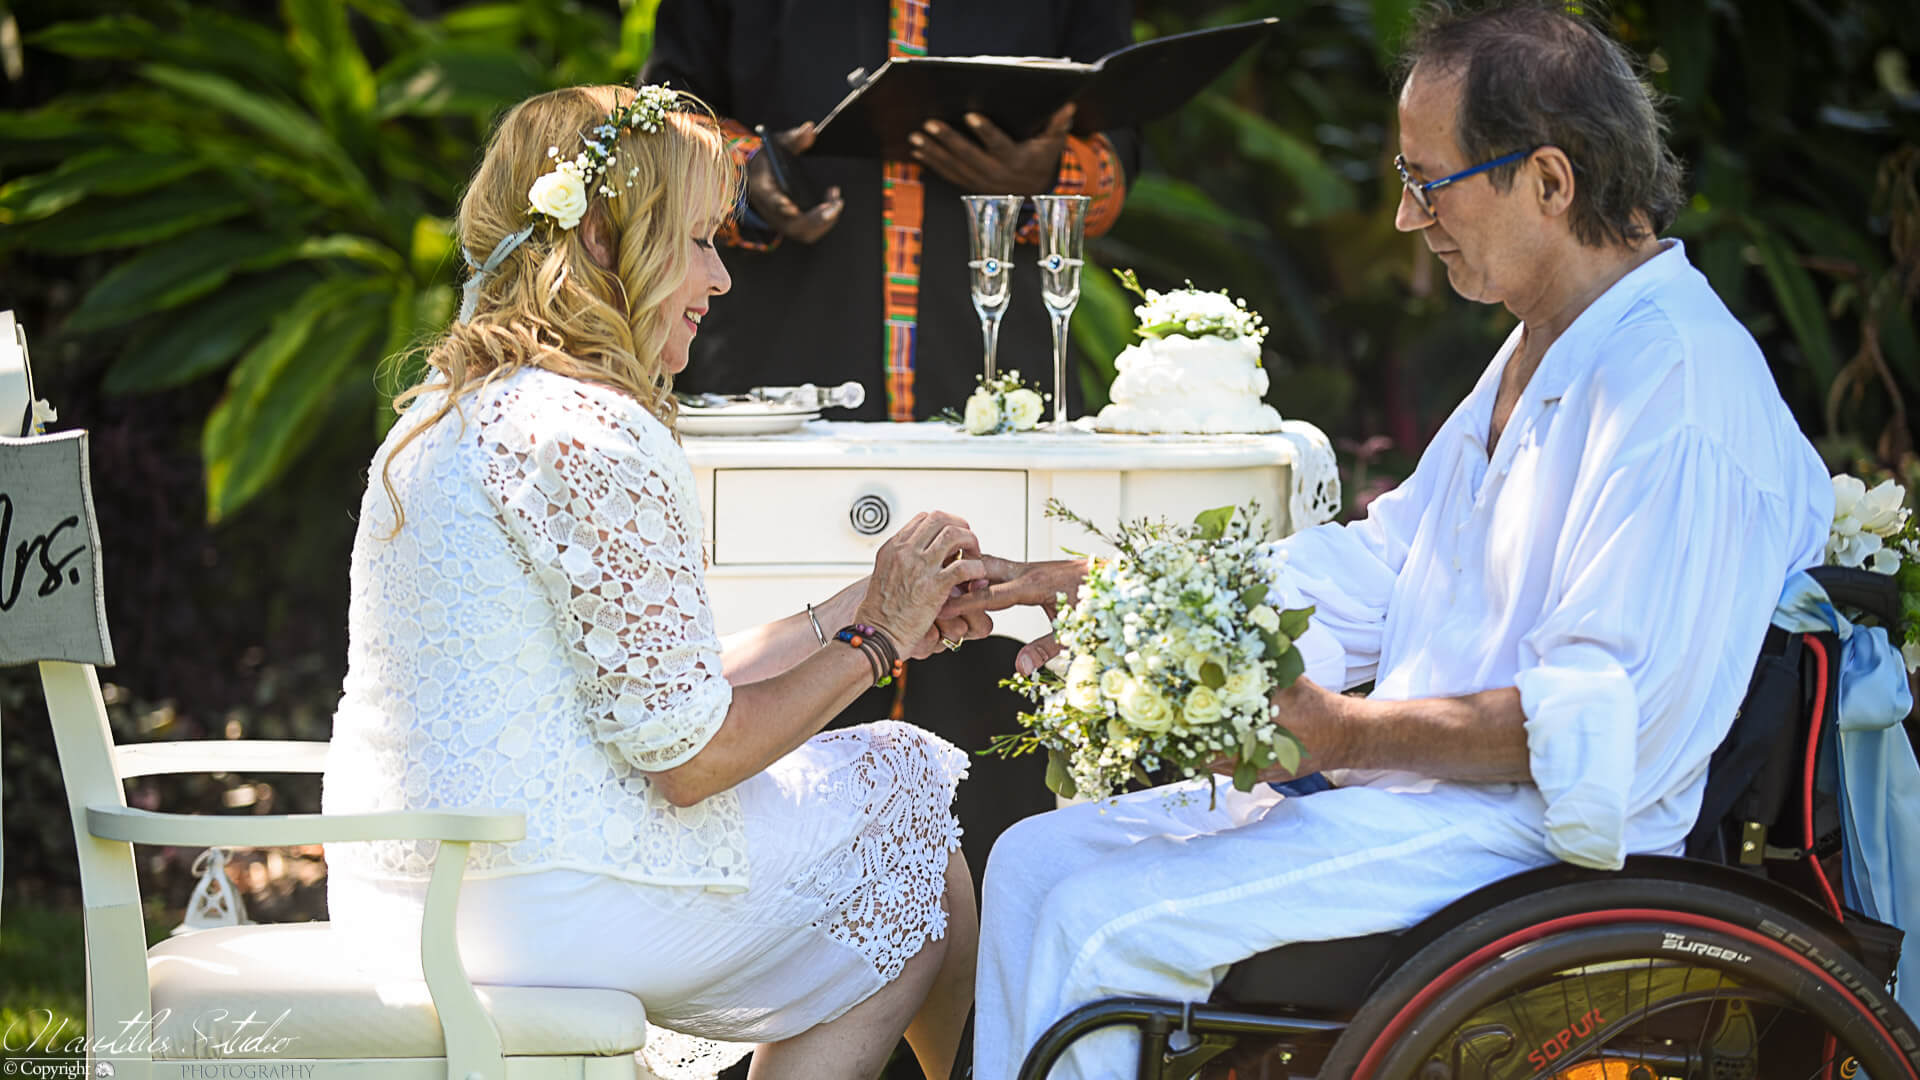 Wheelchair wedding in Florida, showing couple exchanging rings